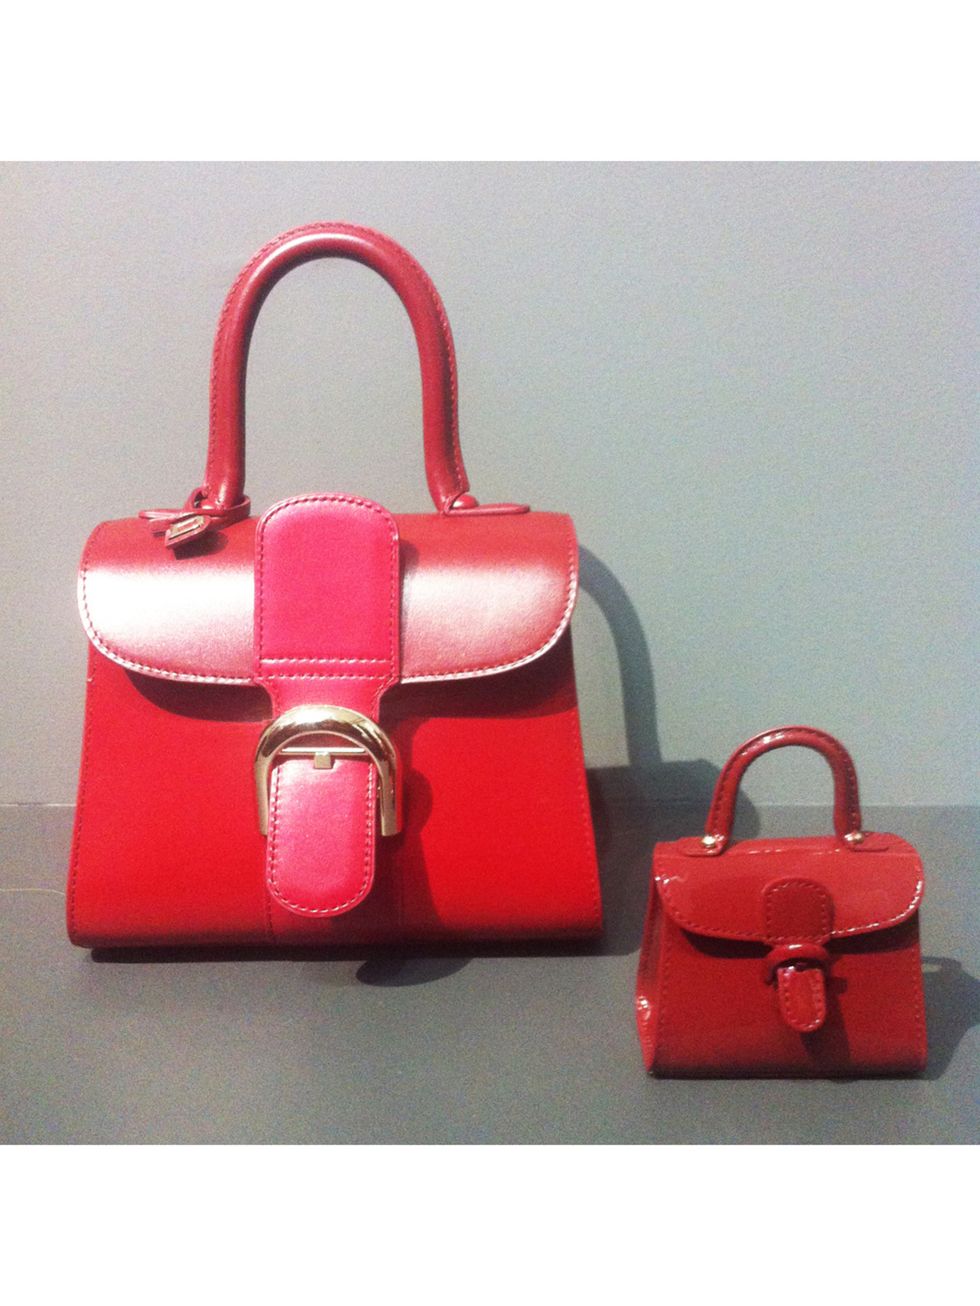 Product, Red, Bag, Style, Luggage and bags, Beauty, Carmine, Shoulder bag, Leather, Still life photography, 